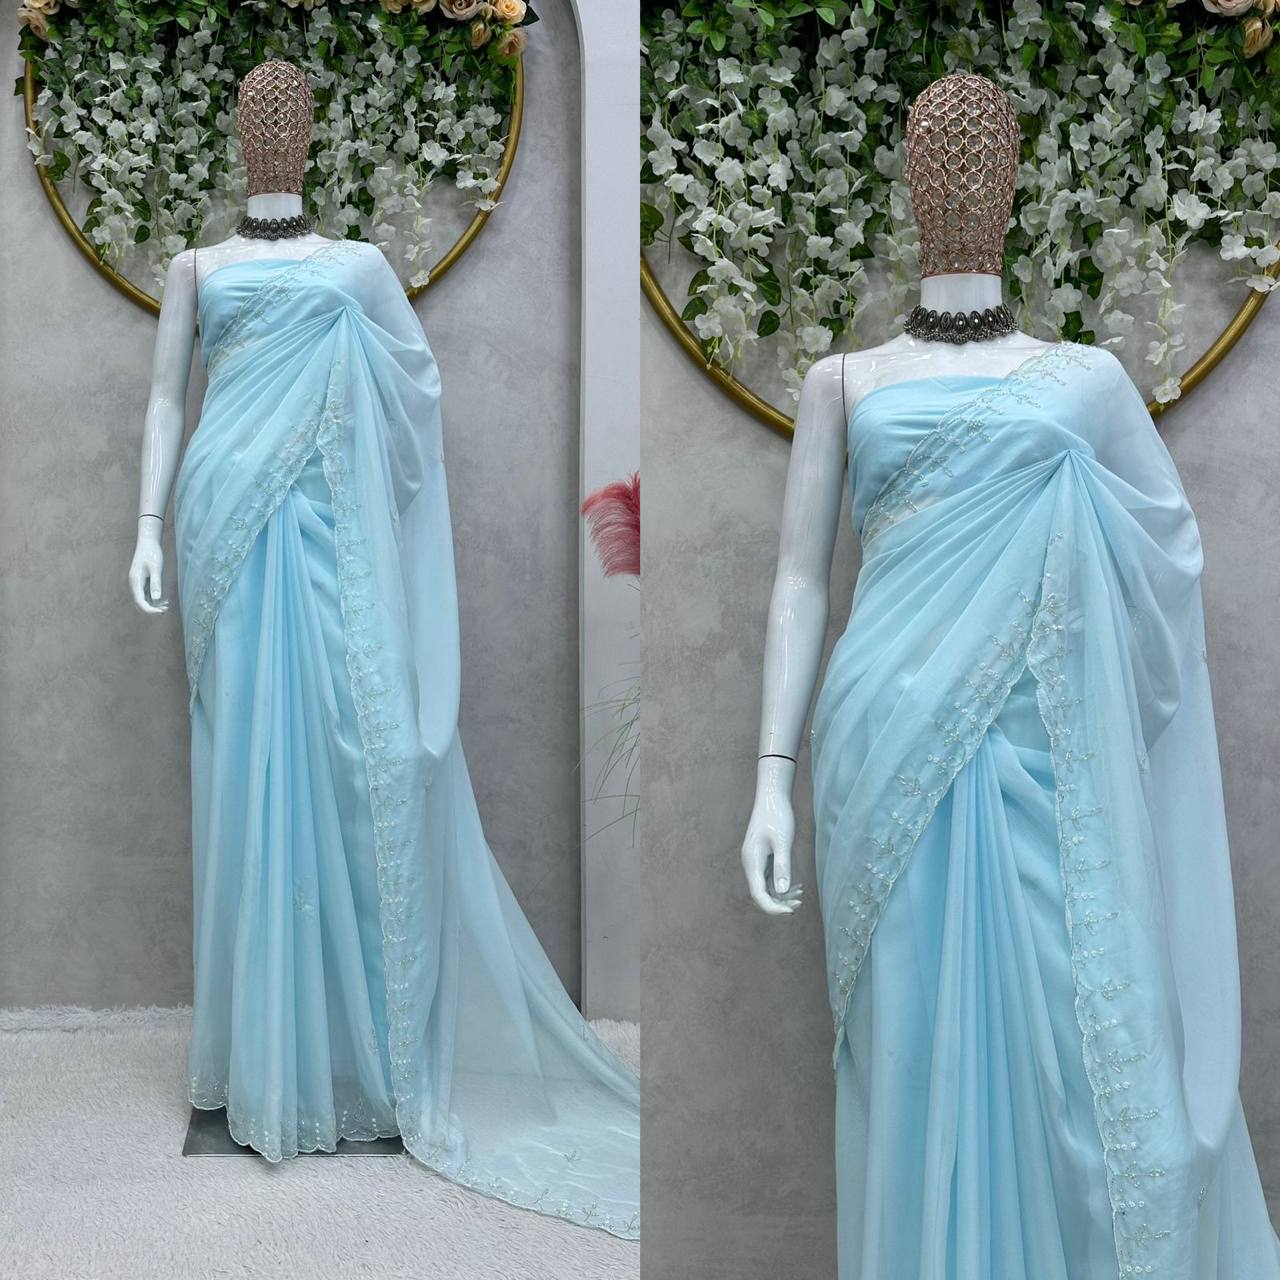 "Celestial Blue Handcrafted Tabby Silk Saree with Unstitched Blouse - Elegant Traditional Wear"